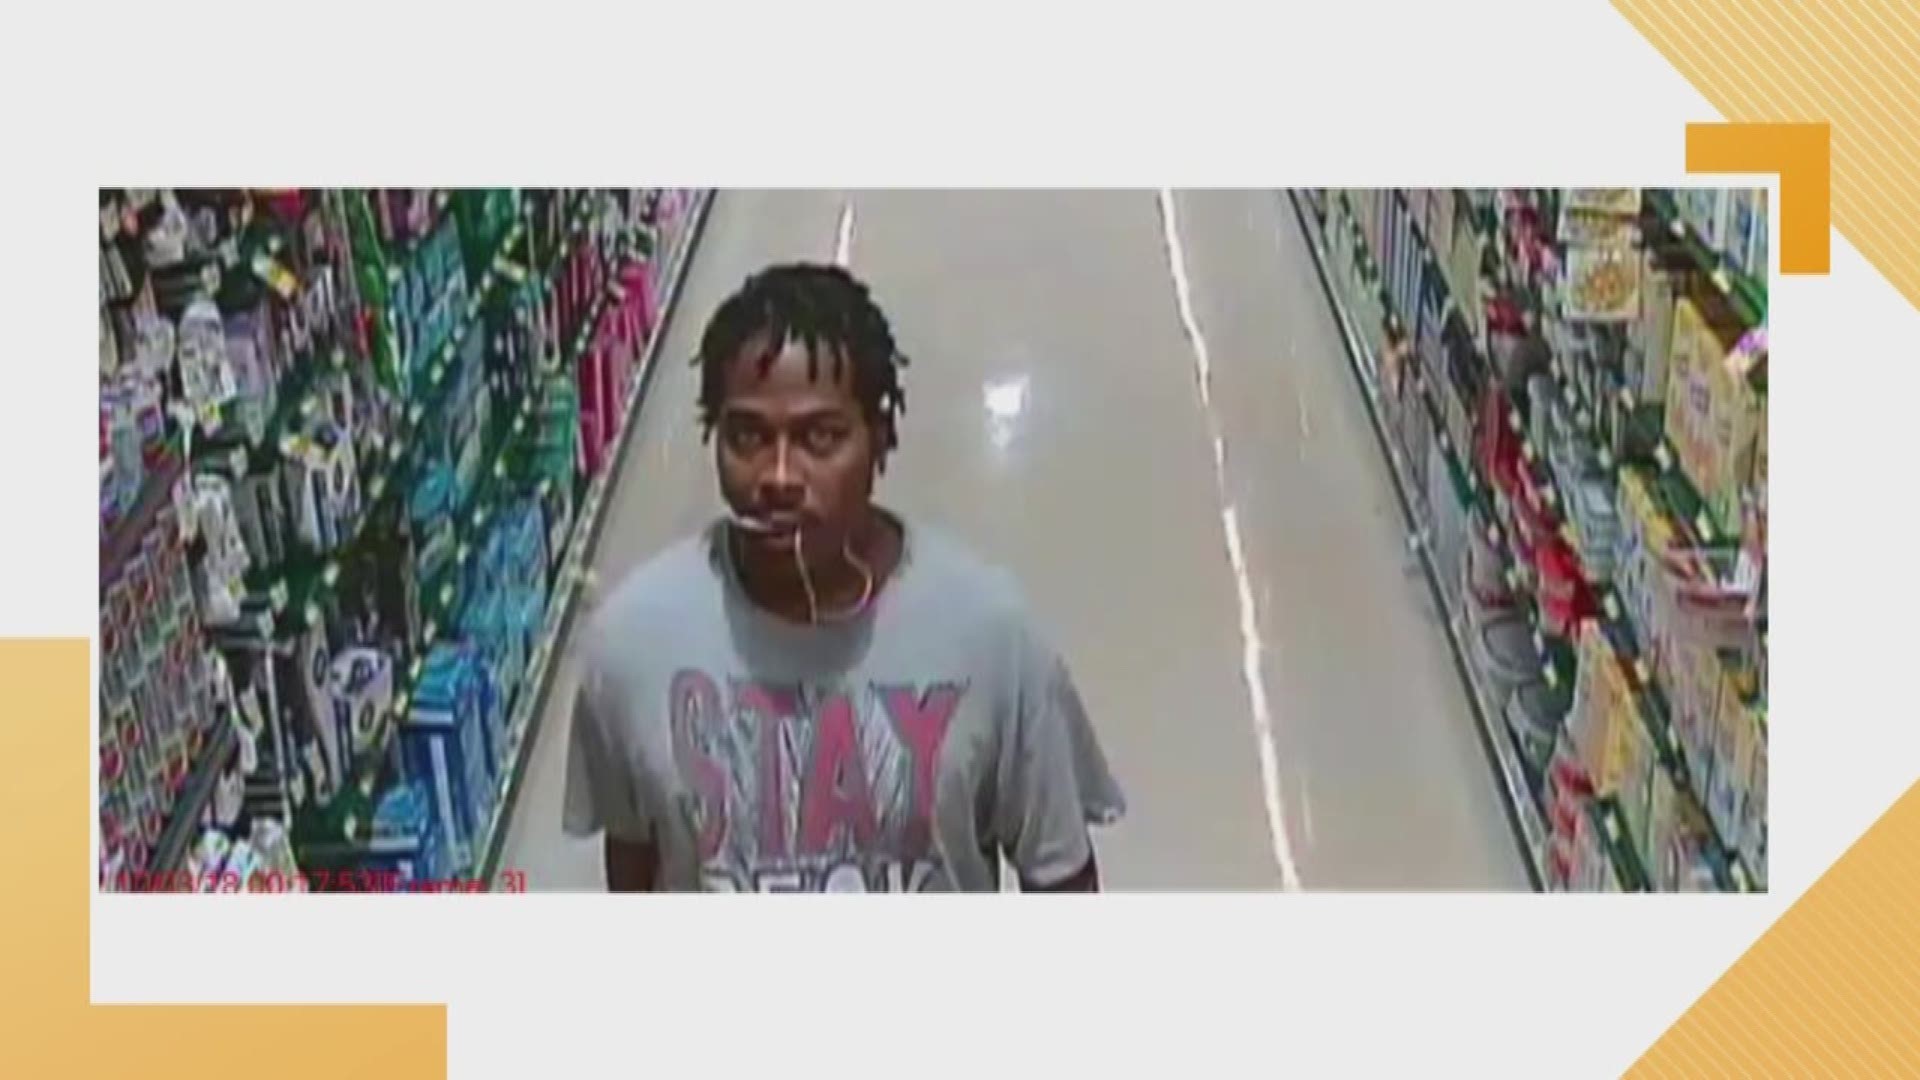 Virginia Beach police are searching for a person of interest in a shooting during an attempted robbery at a Harris Teeter that left an employee injured. The once 24-hour store has changed its hours now operating from 6 a.m. to 11 p.m. effective immediatel